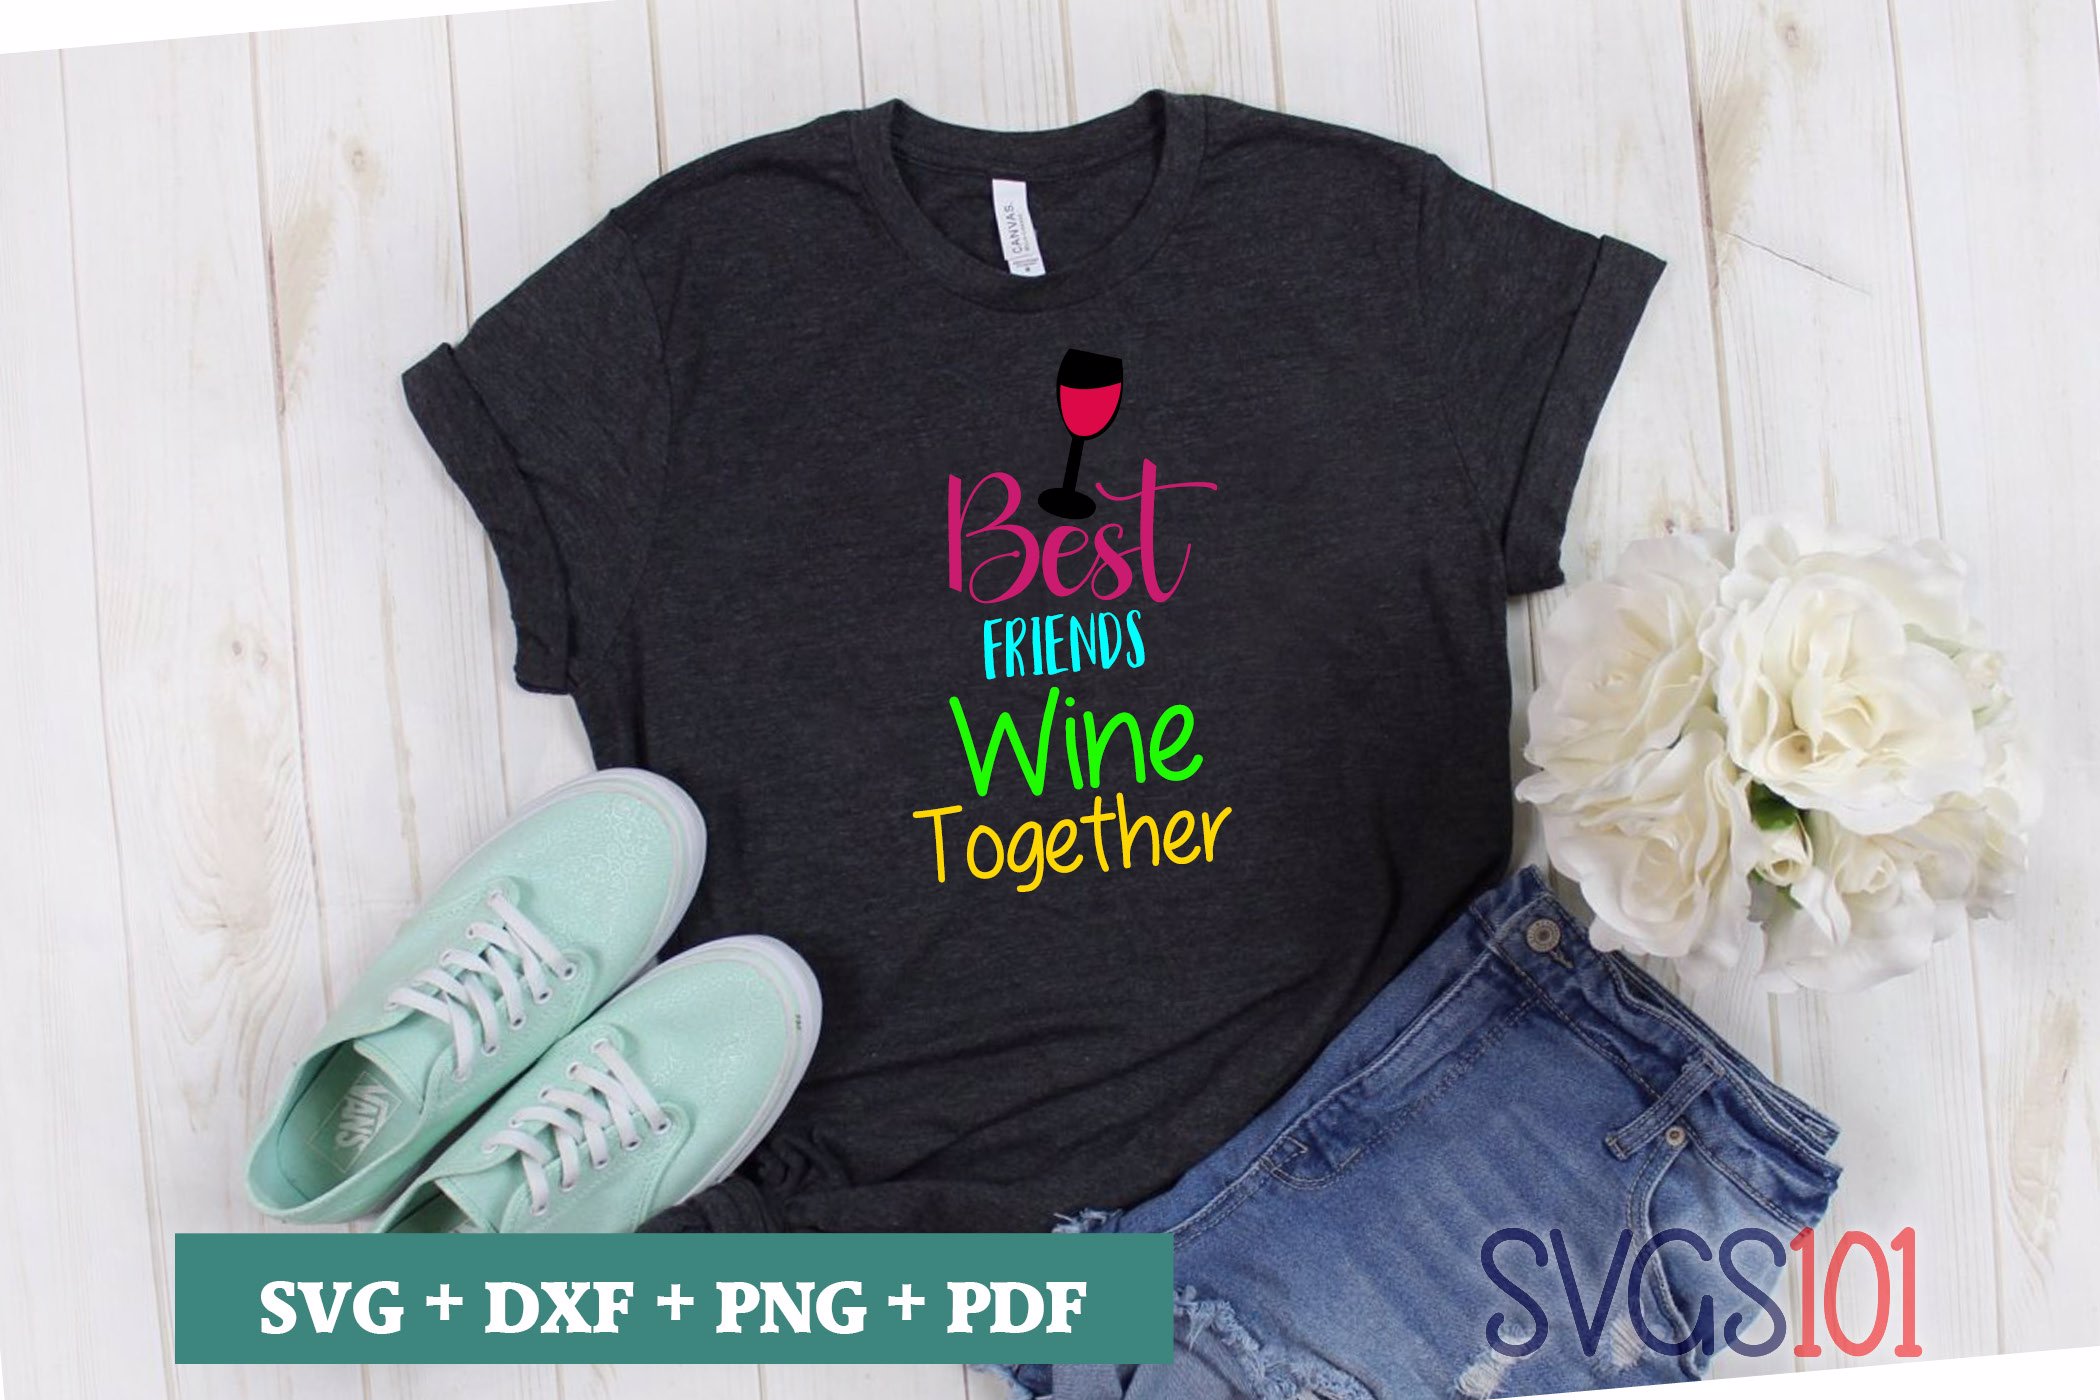 Best Friends Wine Together SVG Cuttable file - DXF, EPS ...